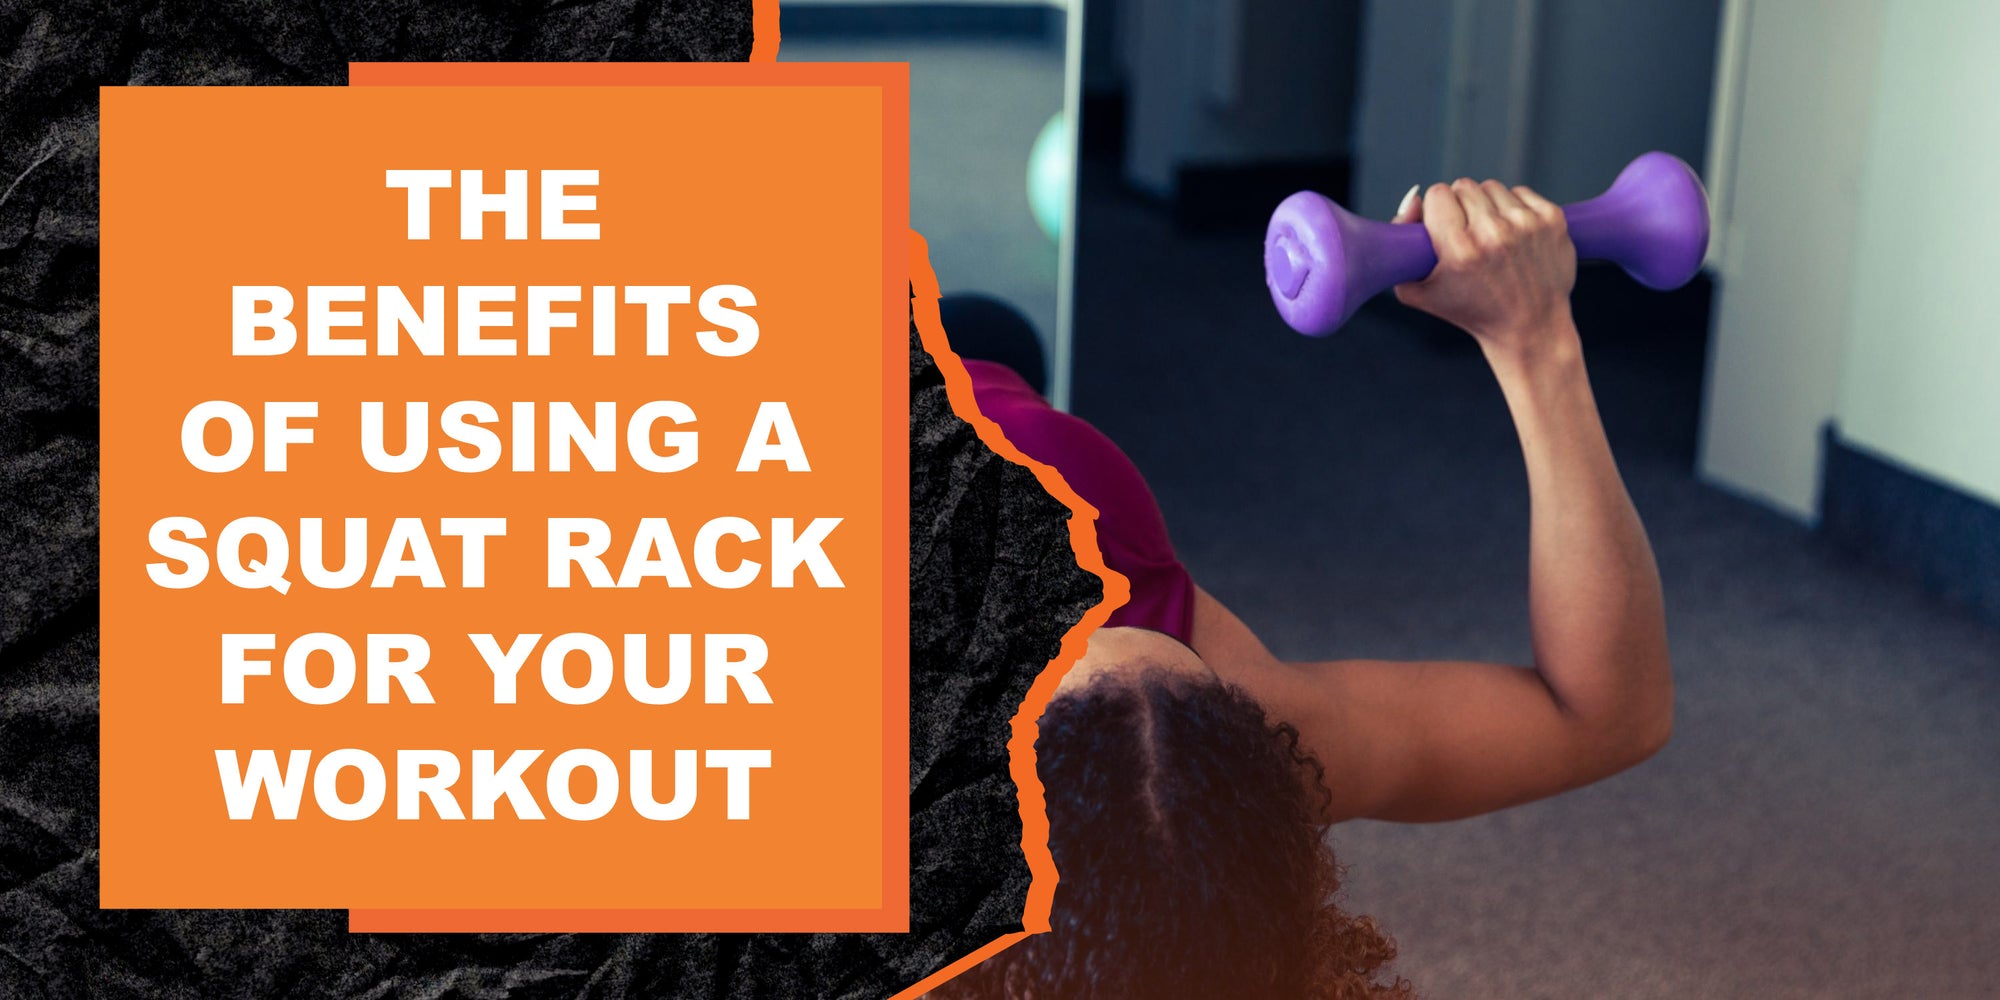 The Benefits of Using a Squat Rack for Your Workout